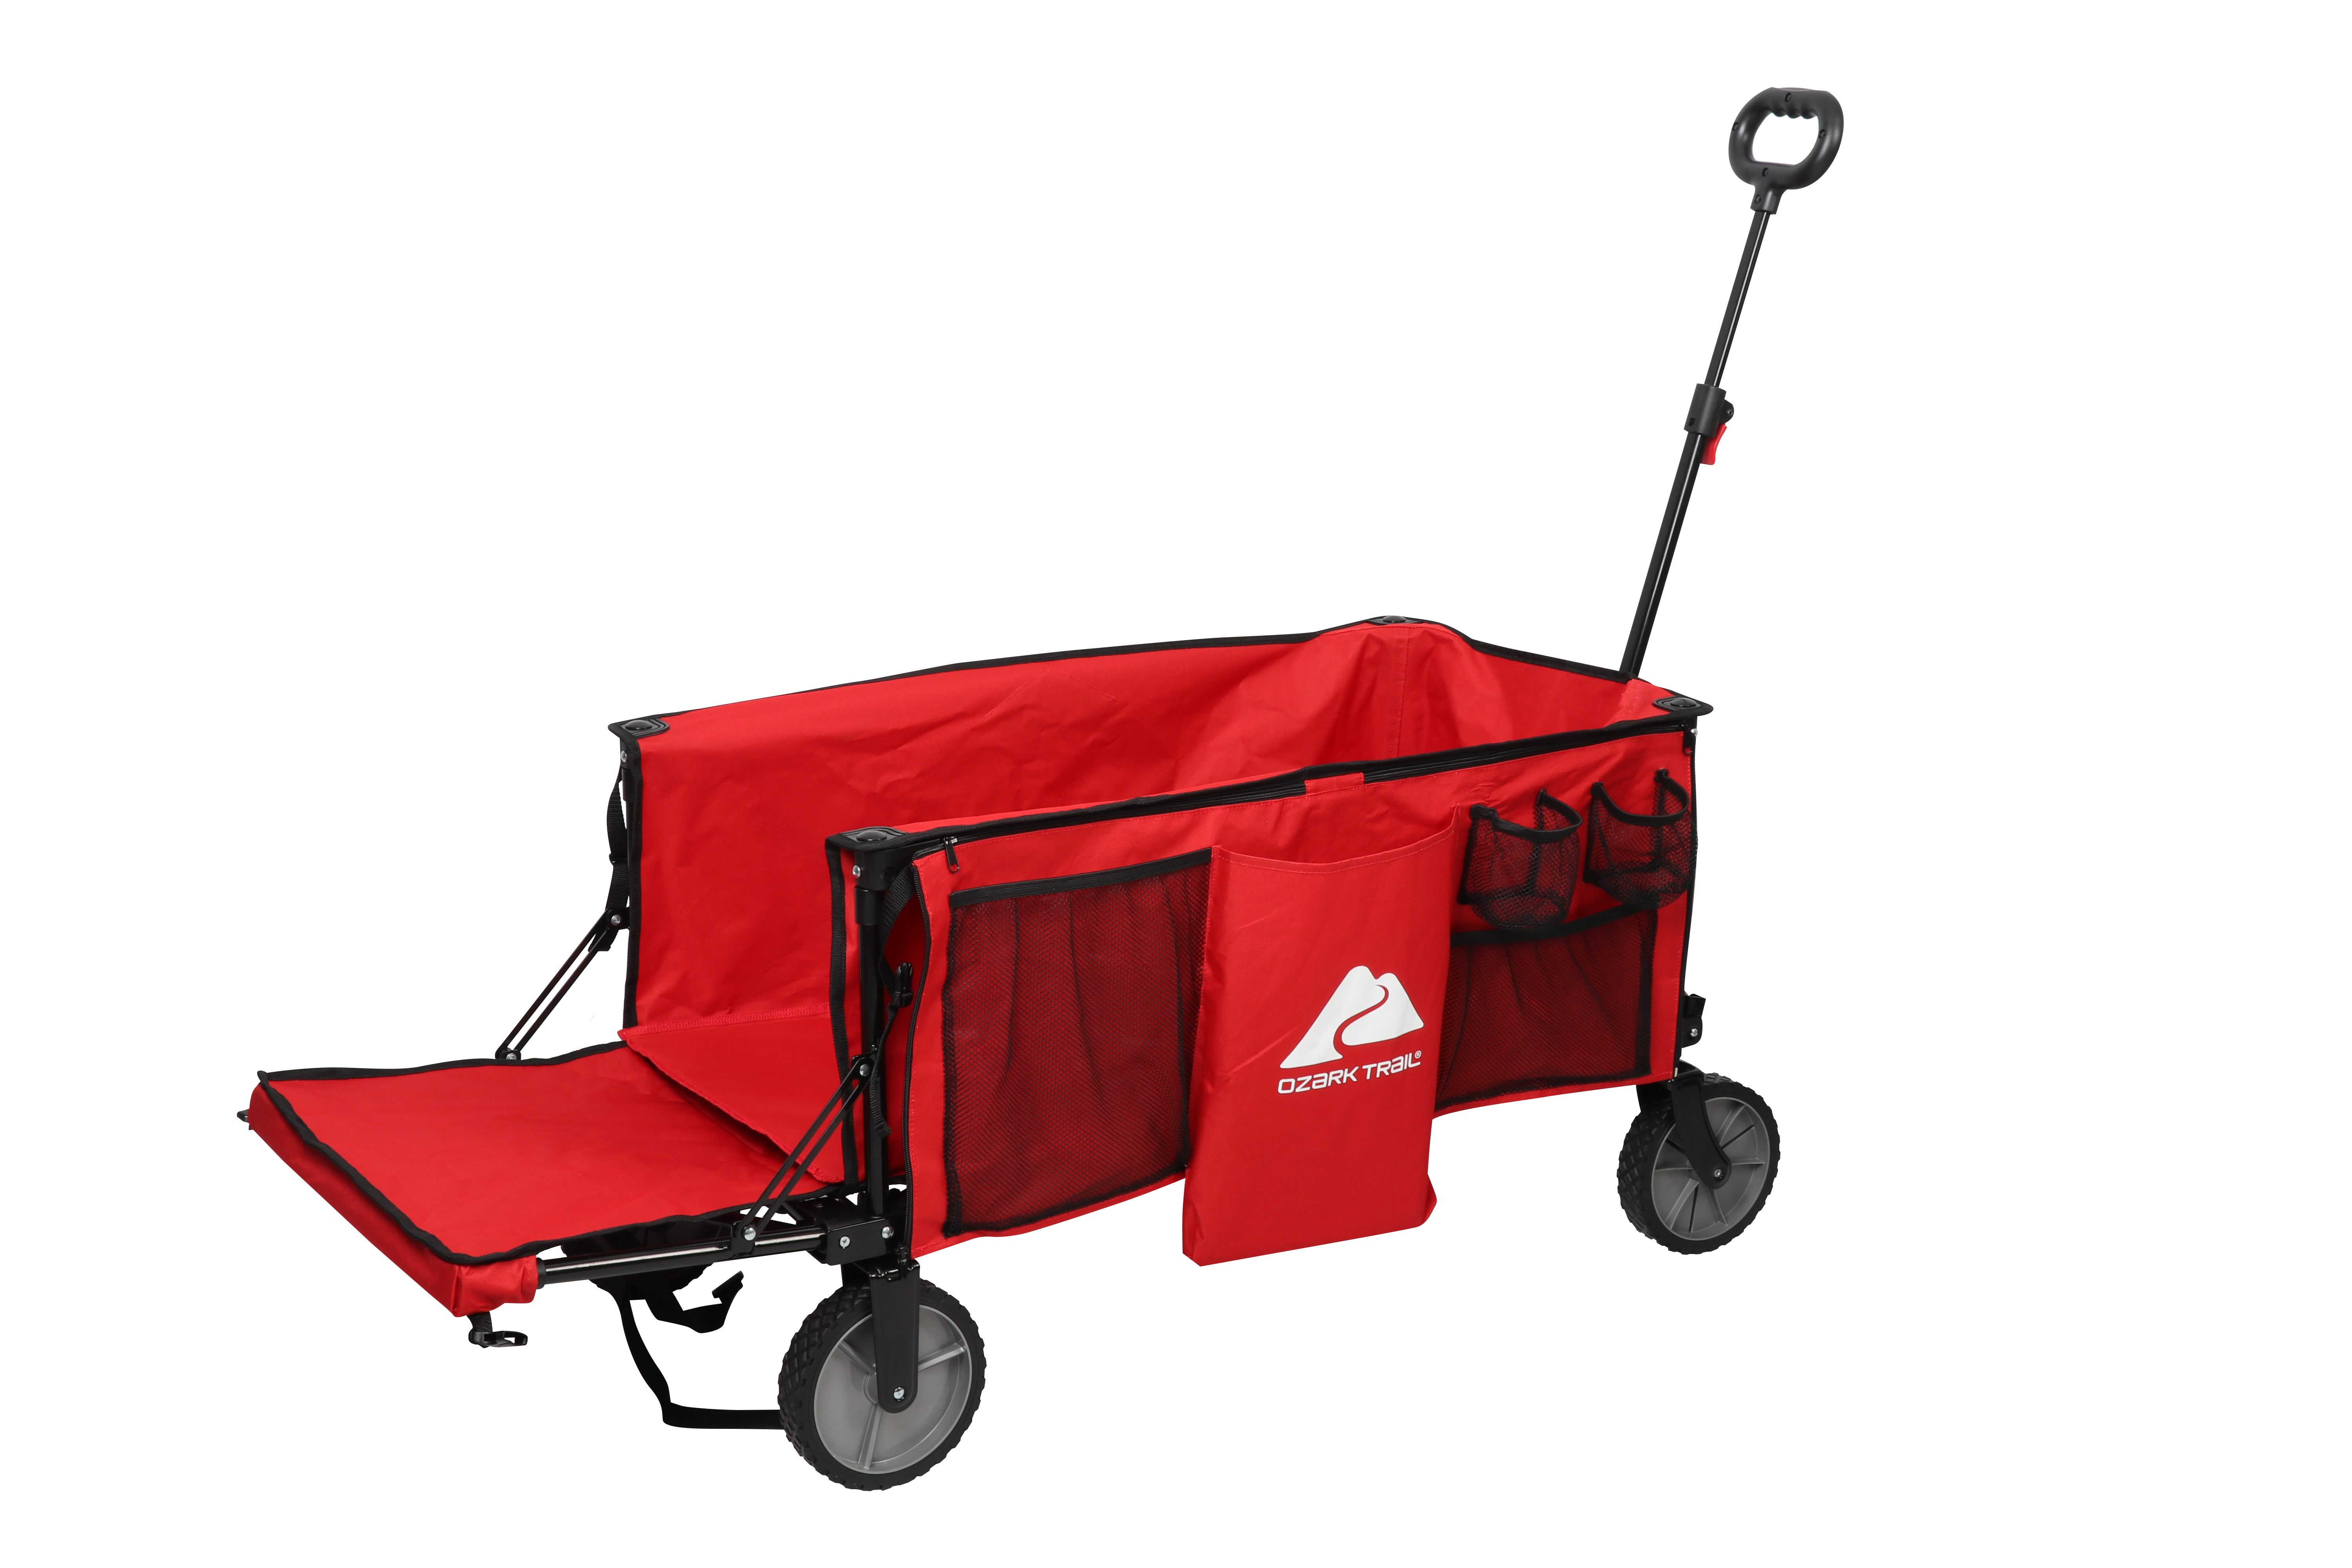 Ozark Trail Camping Utility Wagon with Tailgate & Extension Handle, Red, Polyester - image 7 of 8